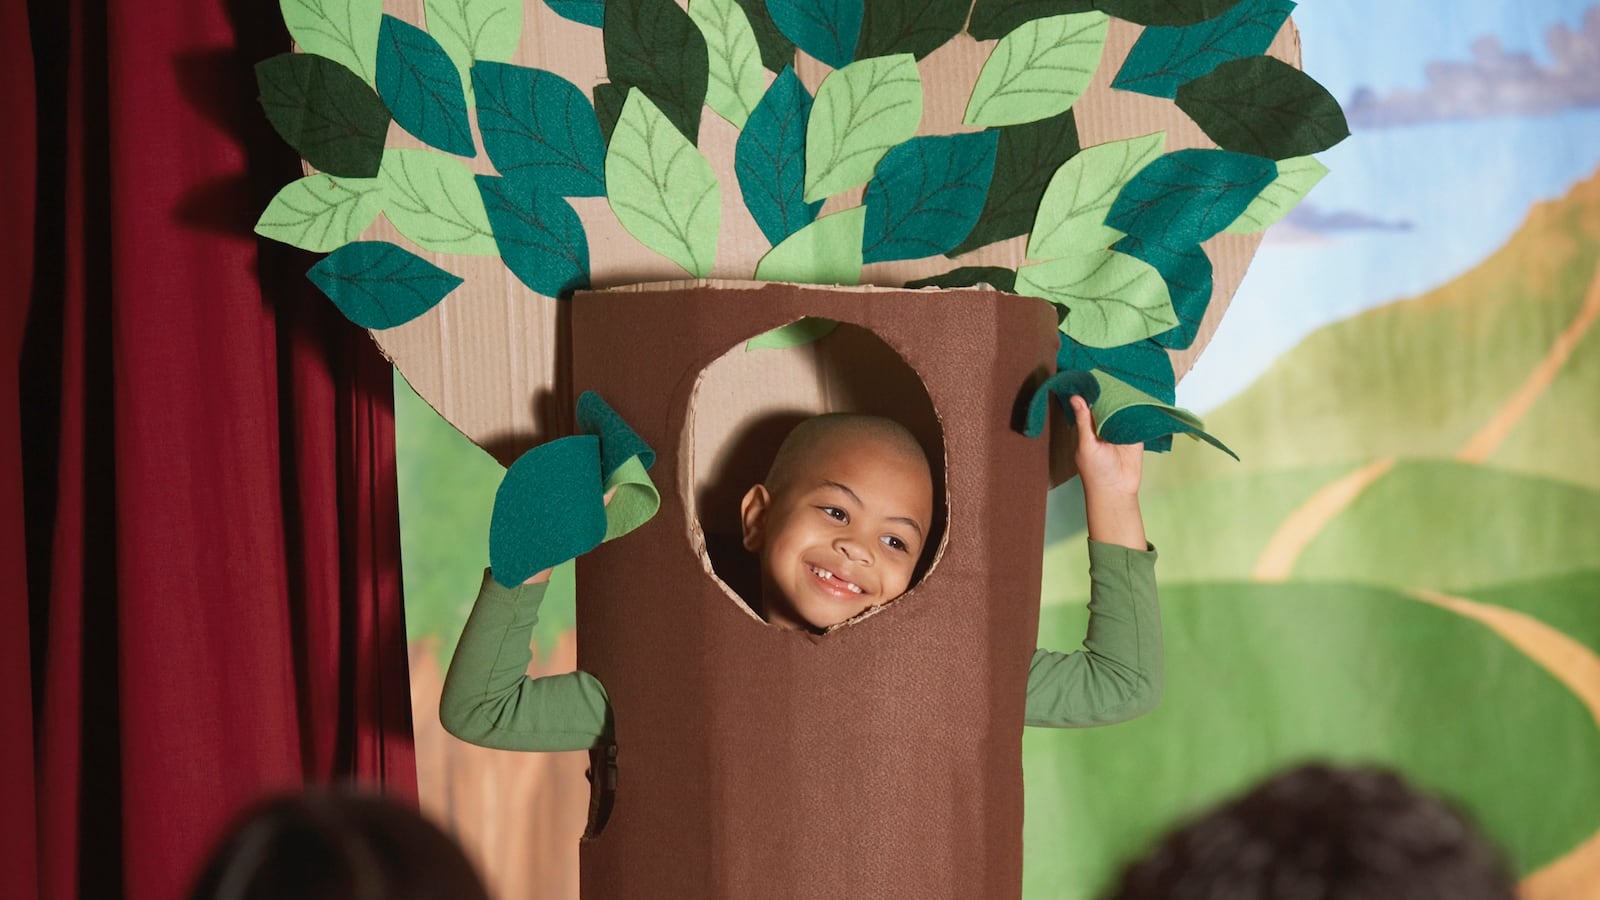 Young boy in a tree costume performs on stage. 